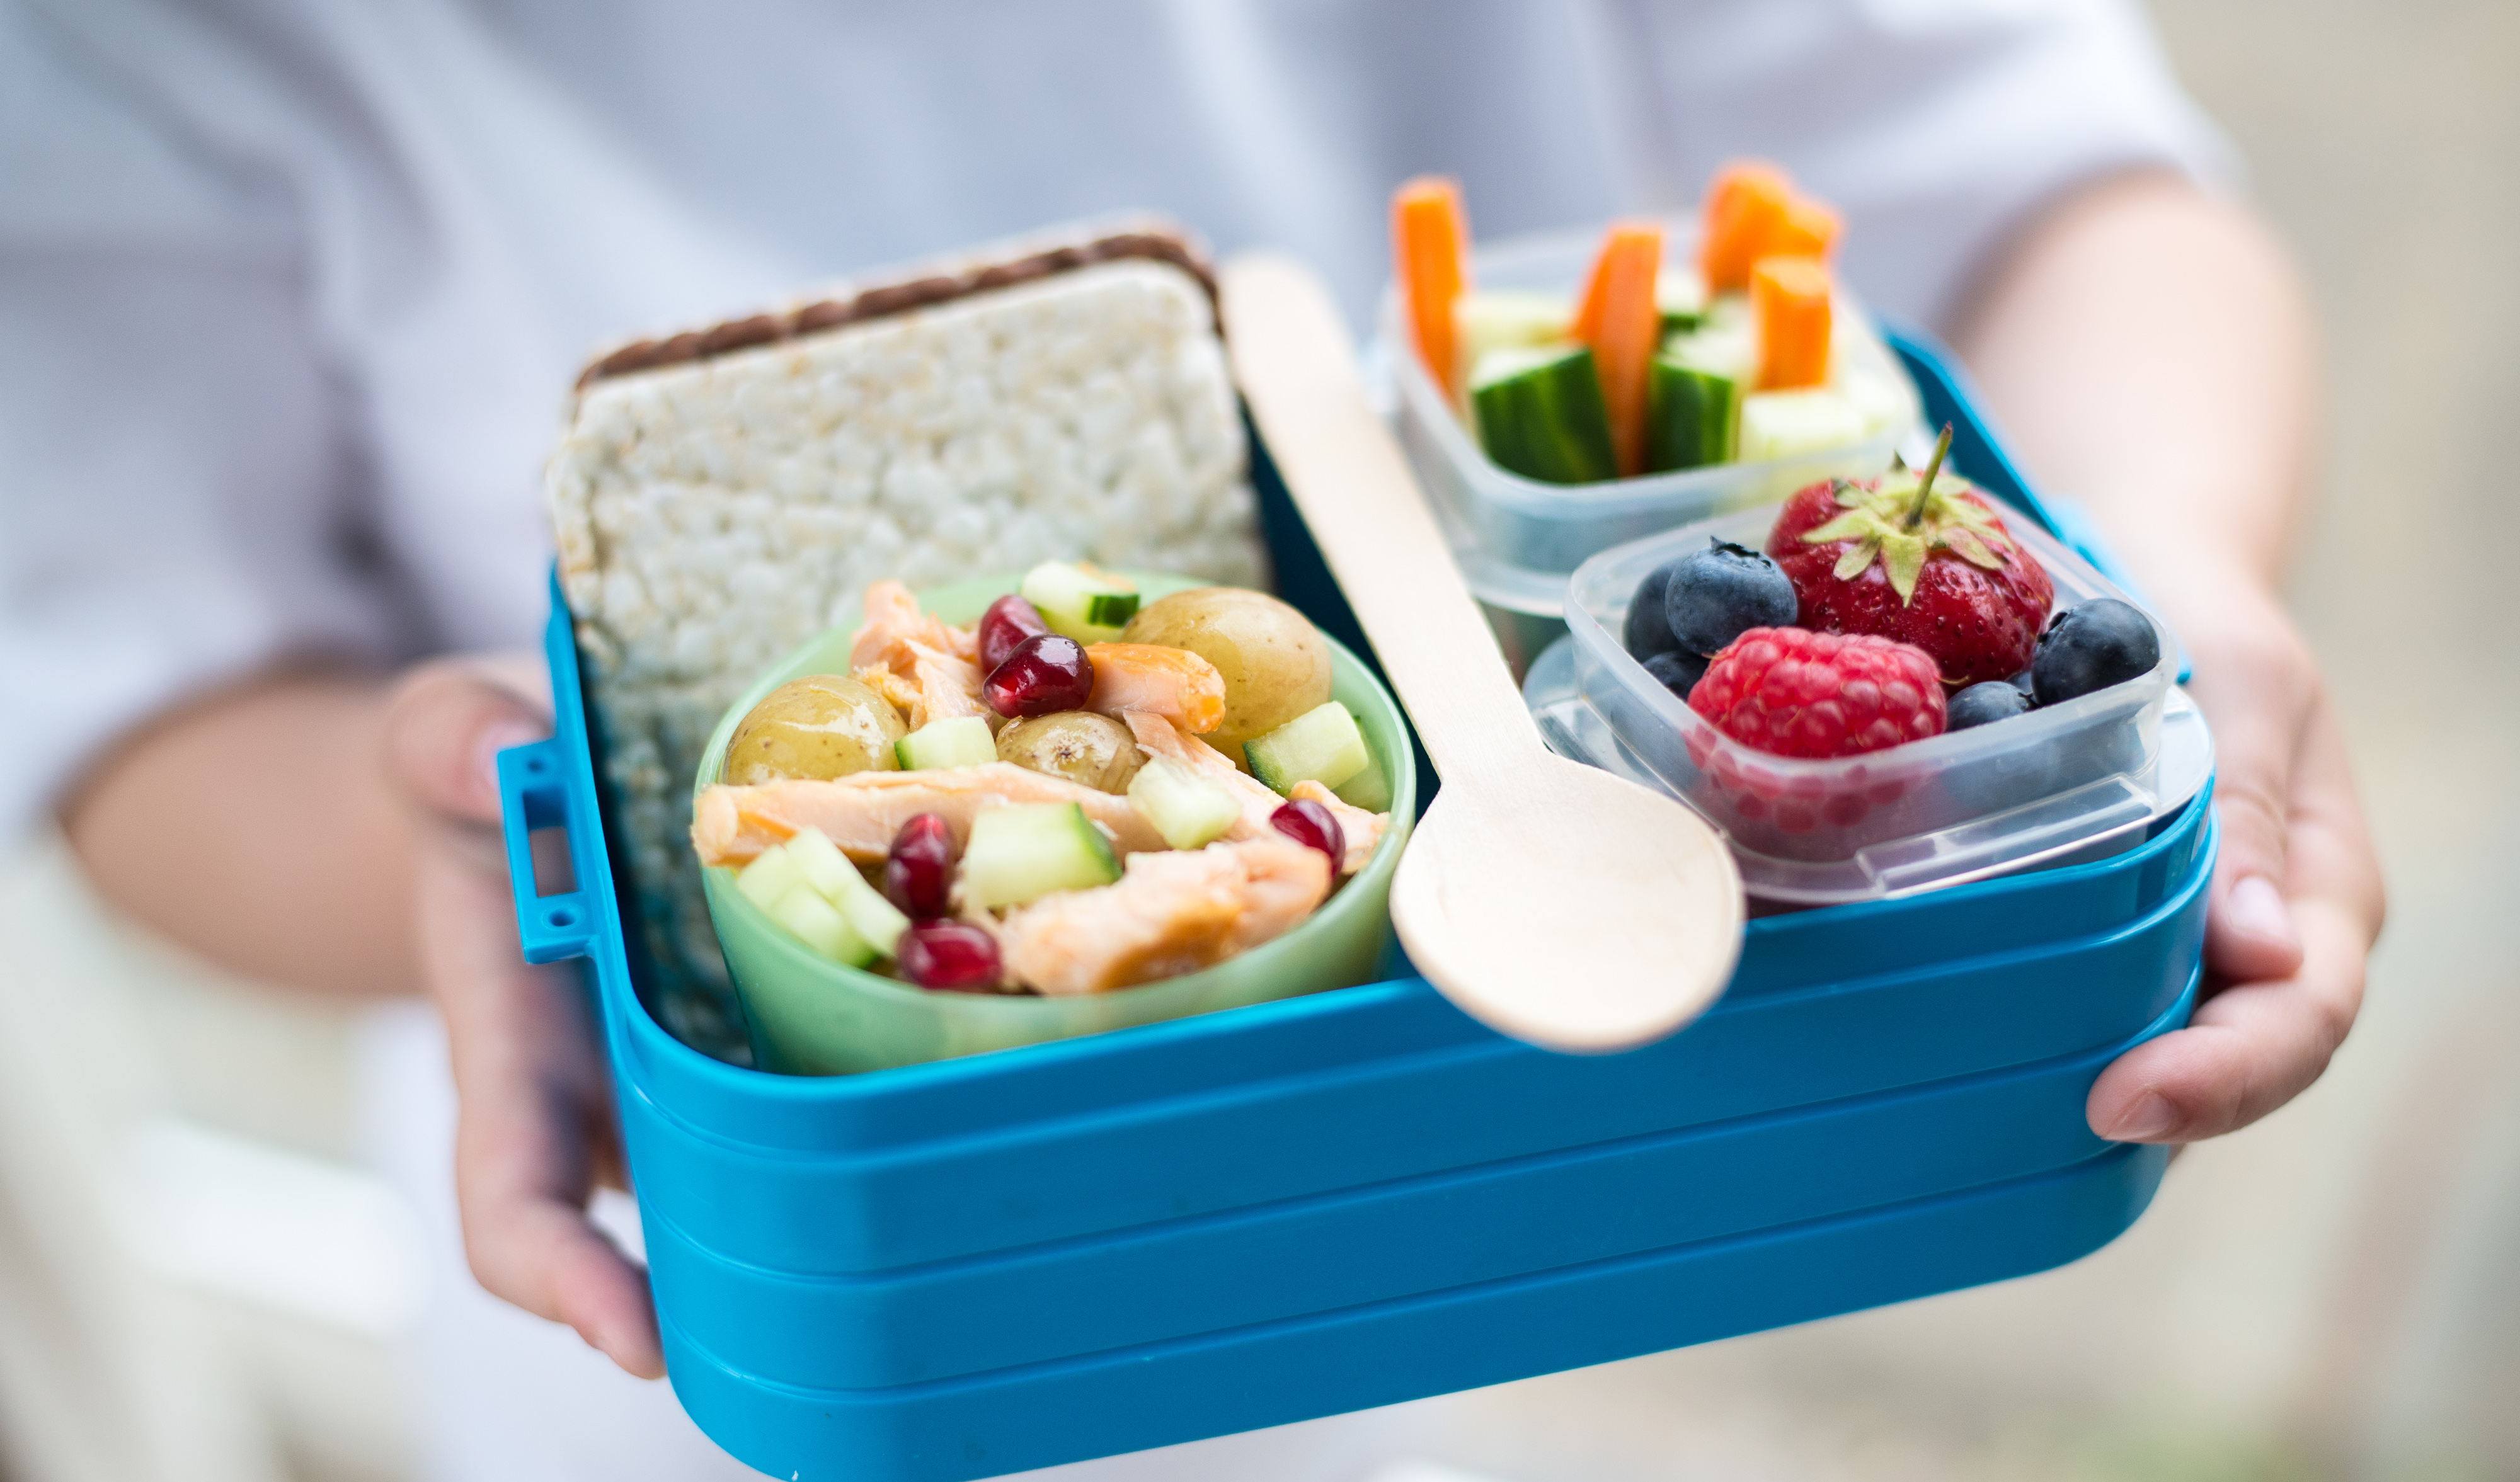 Pink Lining Lunch Box